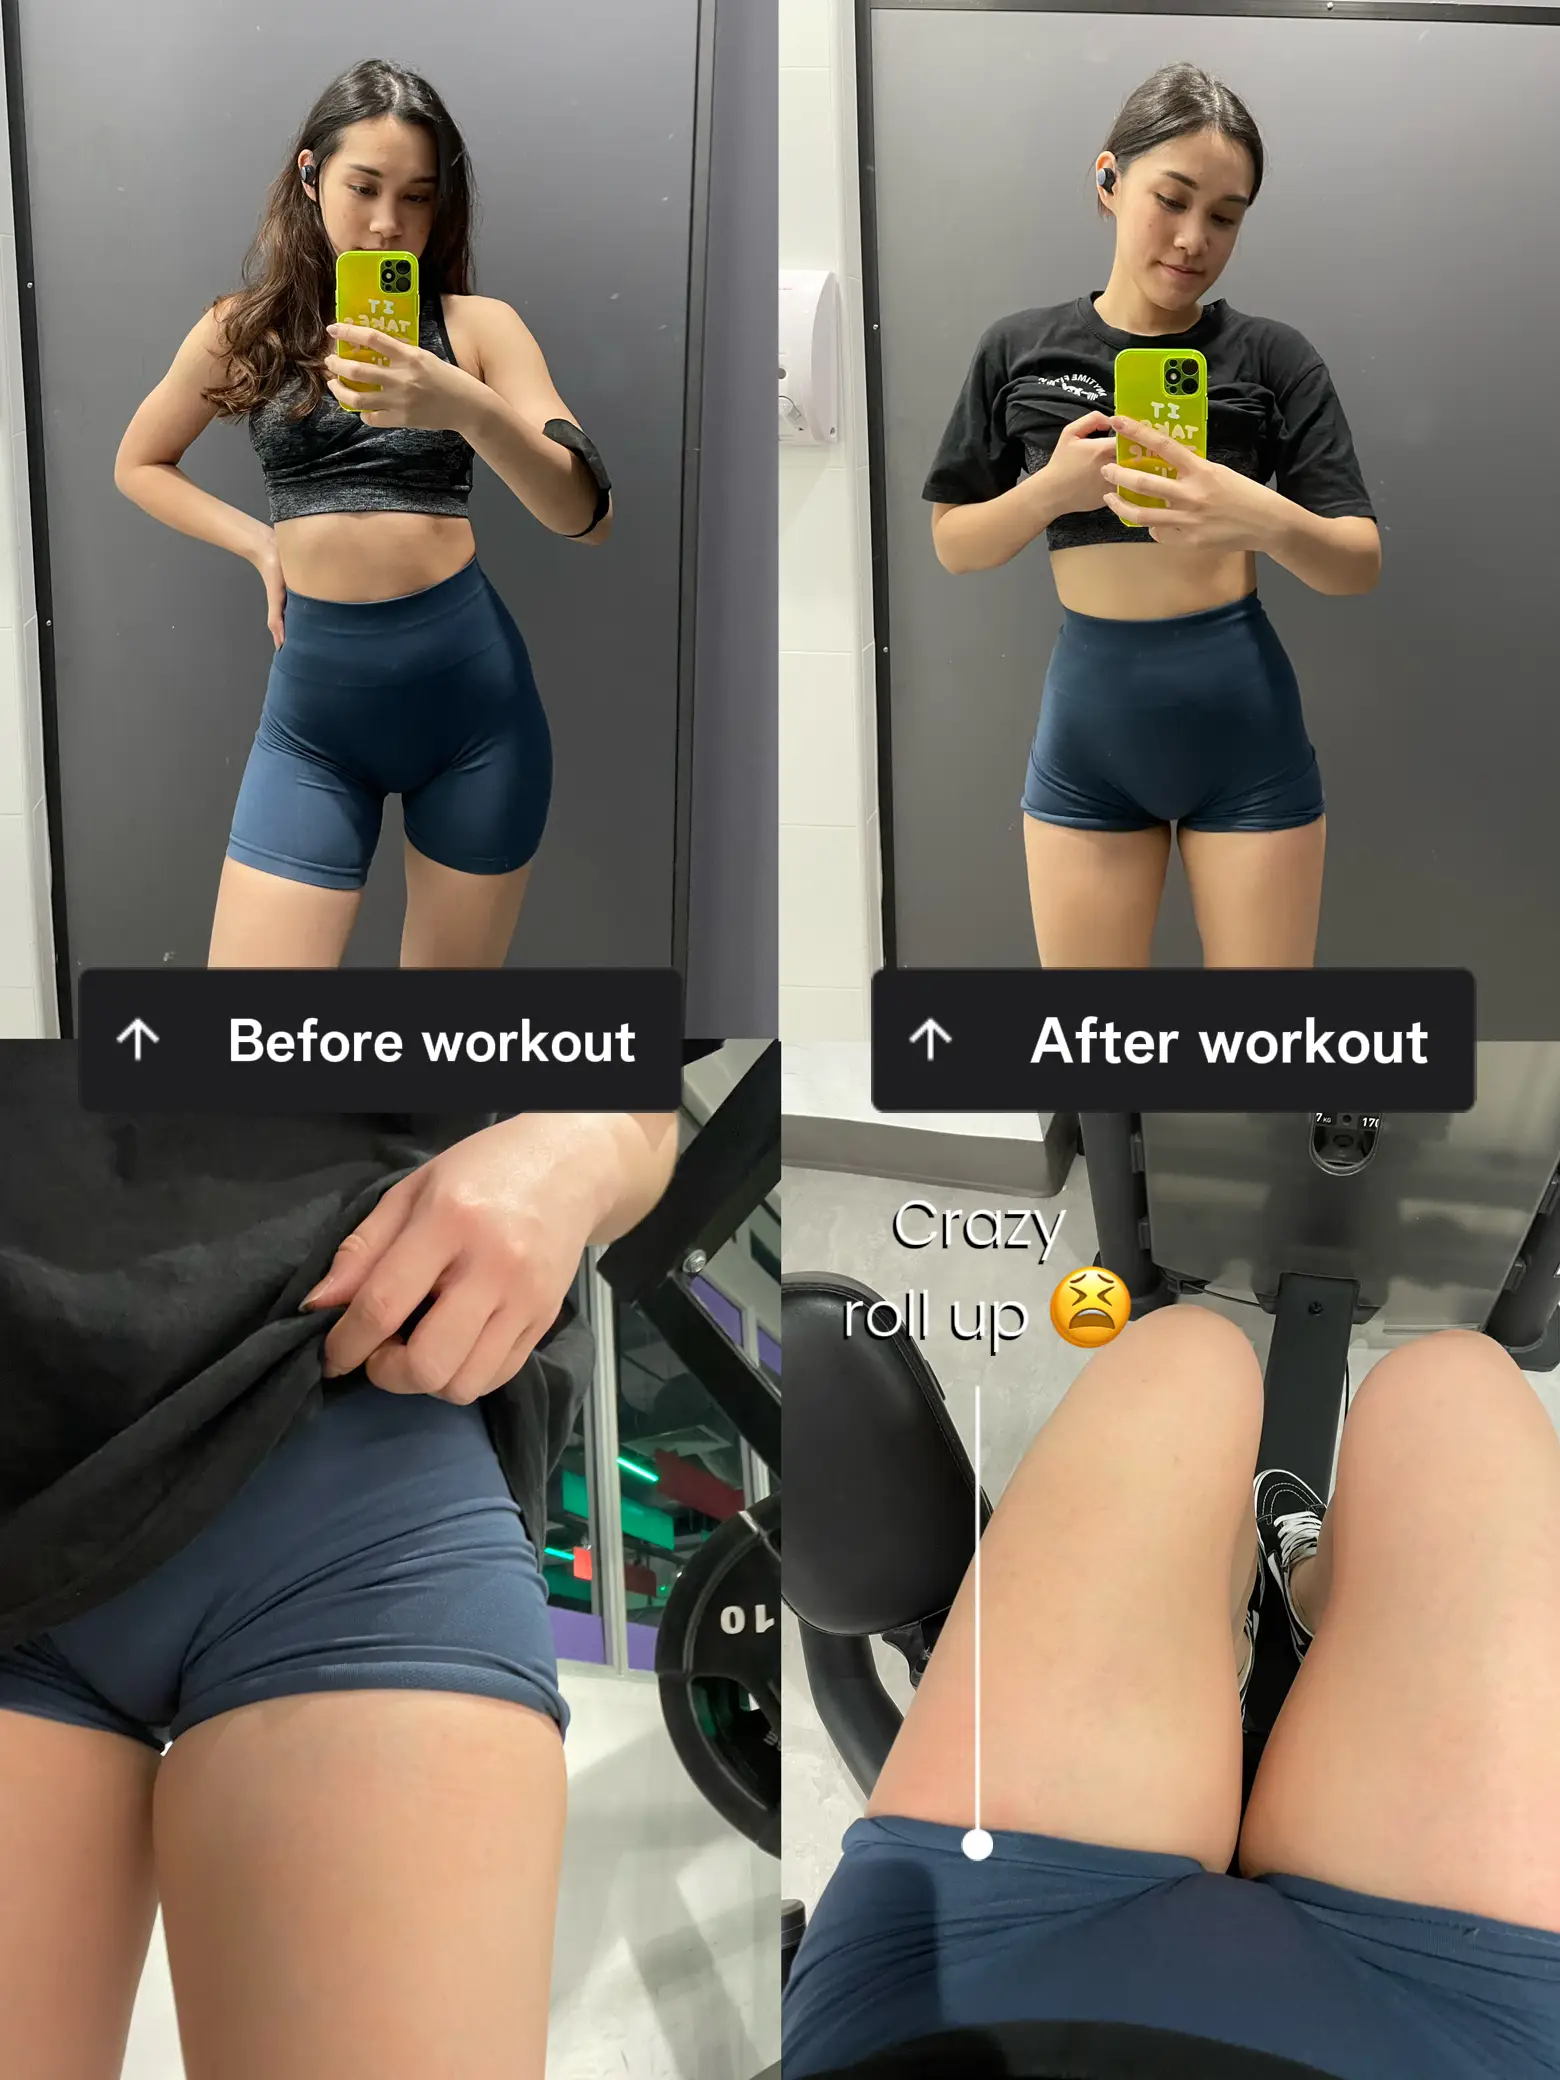 Are these $68 gym shorts worth it??? 💸🥹😭, Gallery posted by Chloe 🦋